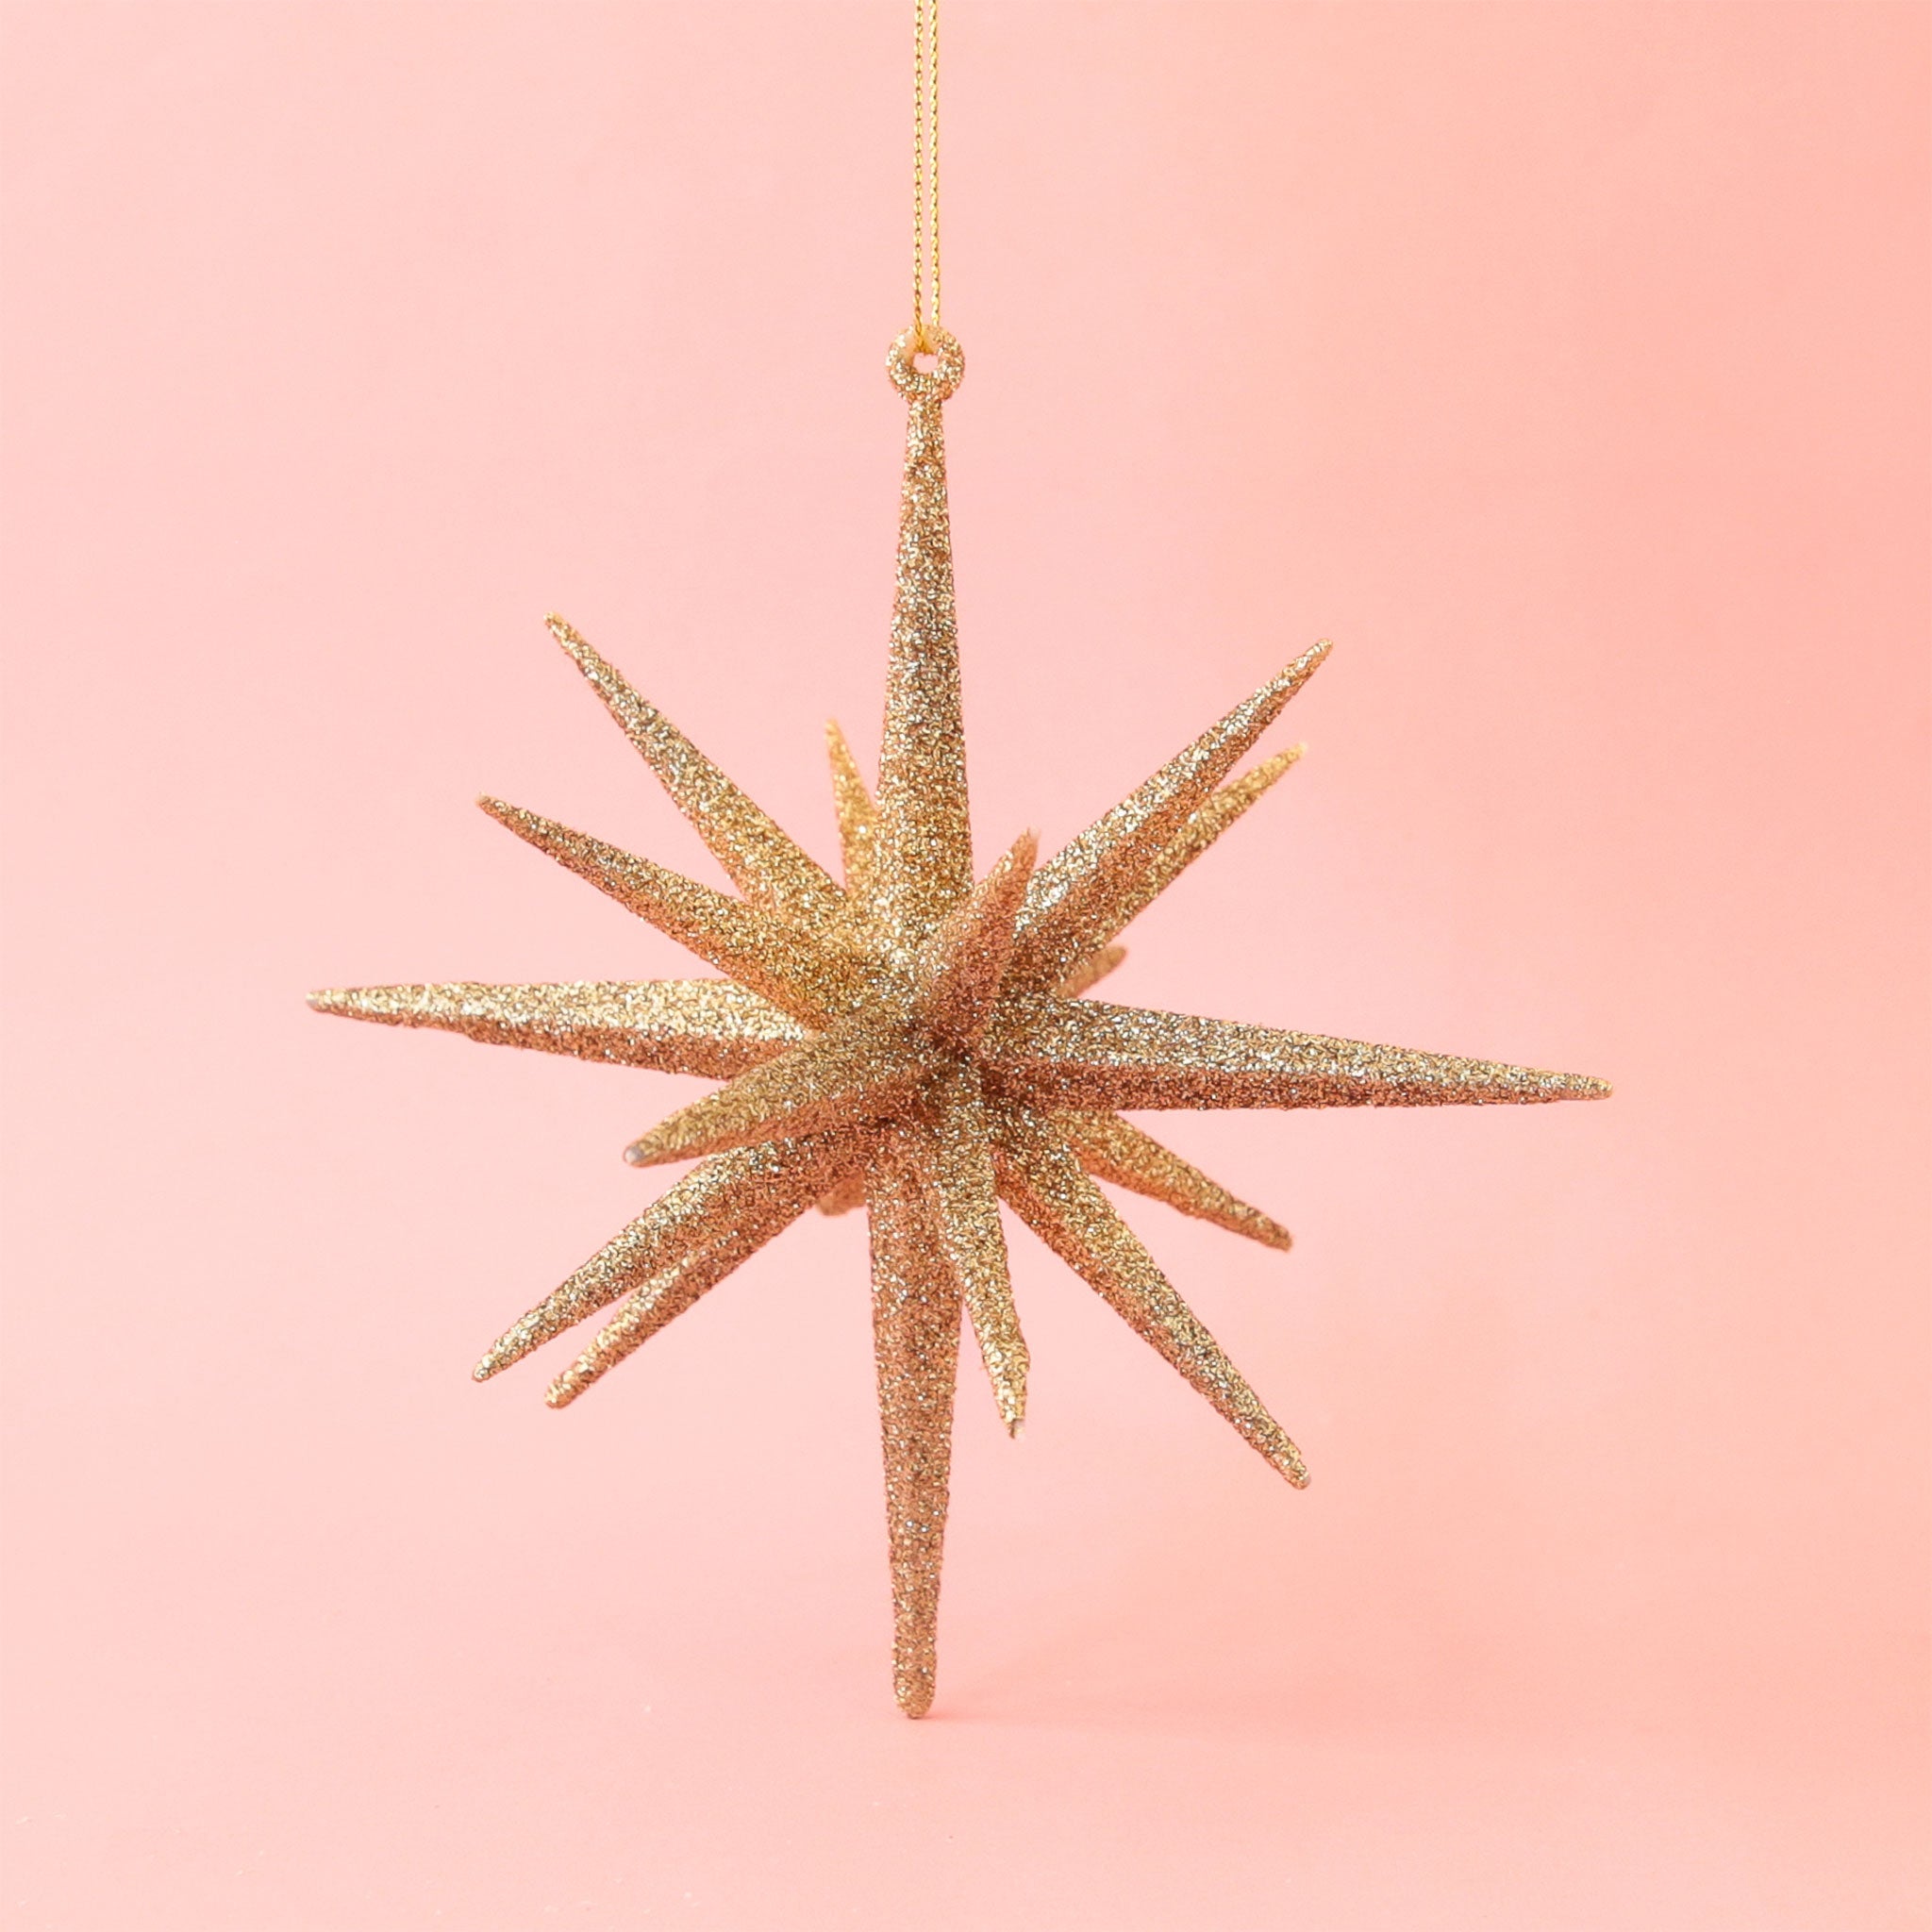 On a peachy pink background is a gold glitter 16 point startburst ornament. 